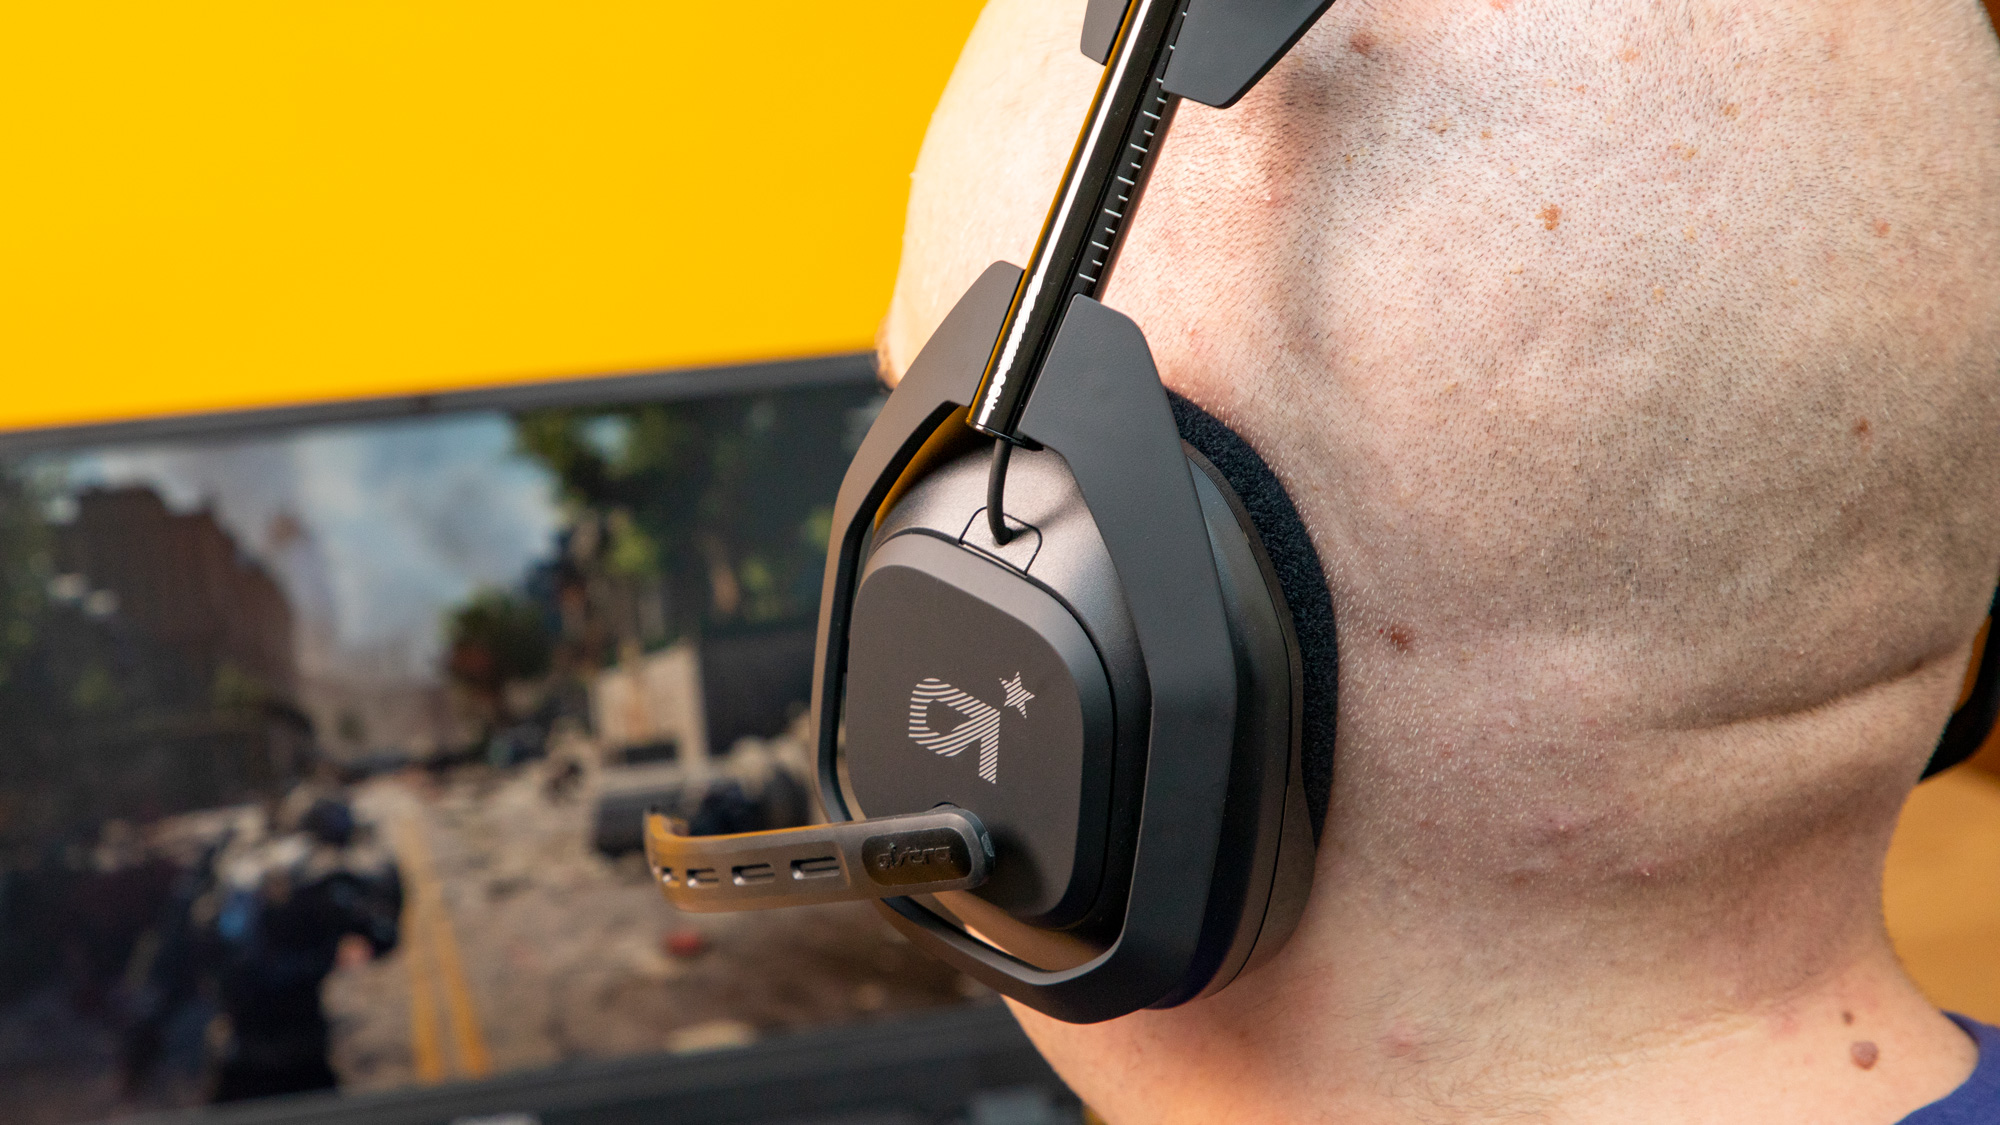 The best PC gaming headsets of 2019 1